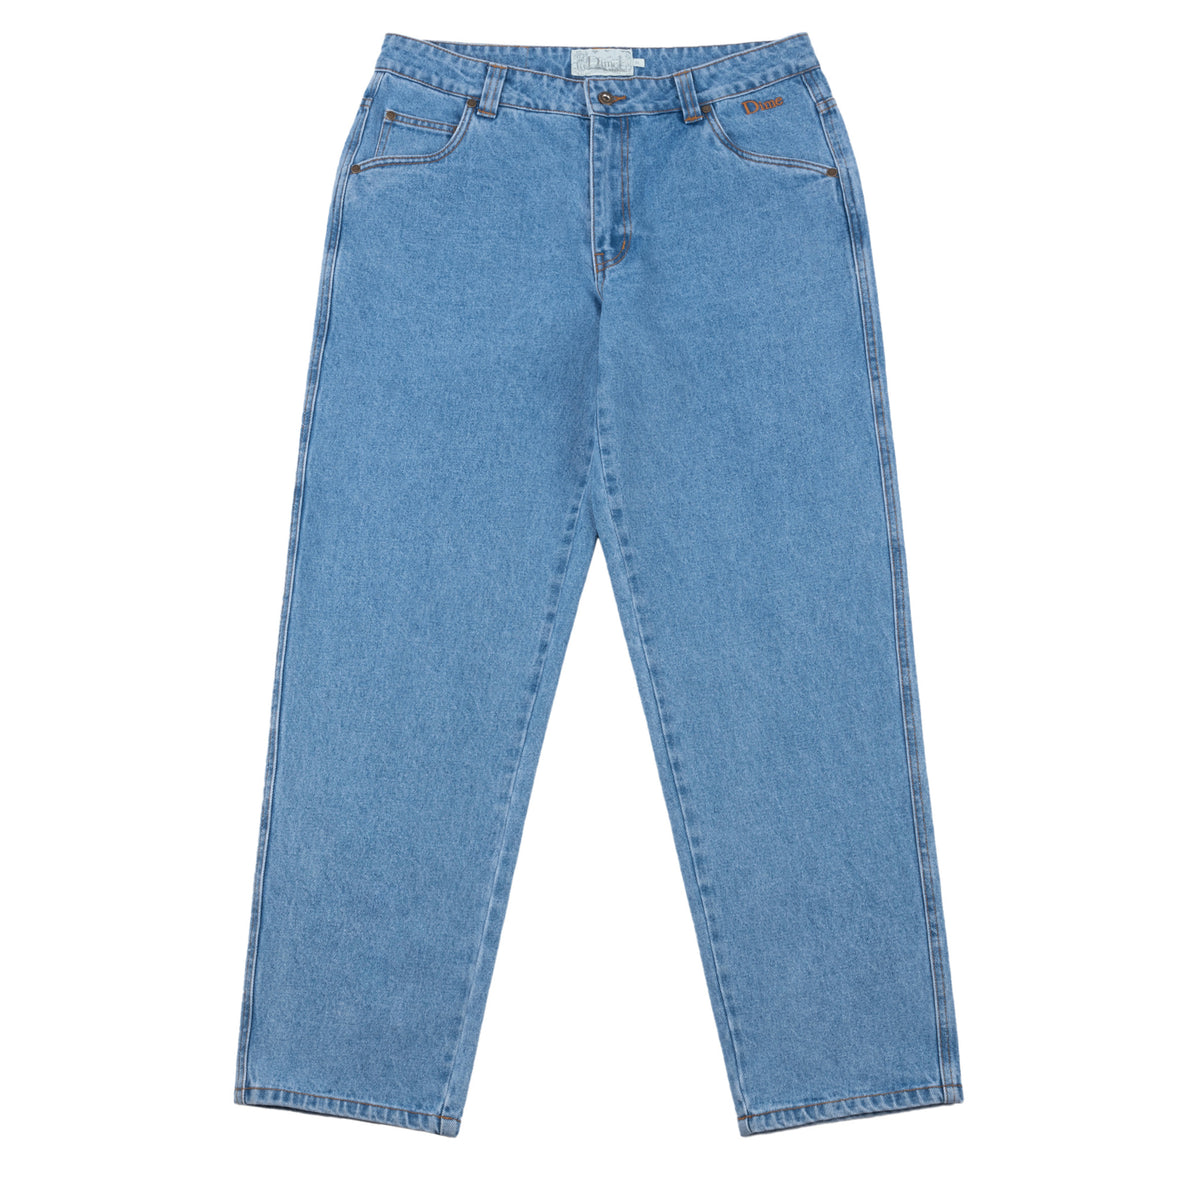 Dime Classic Relaxed Denim Pants - Blue Washed